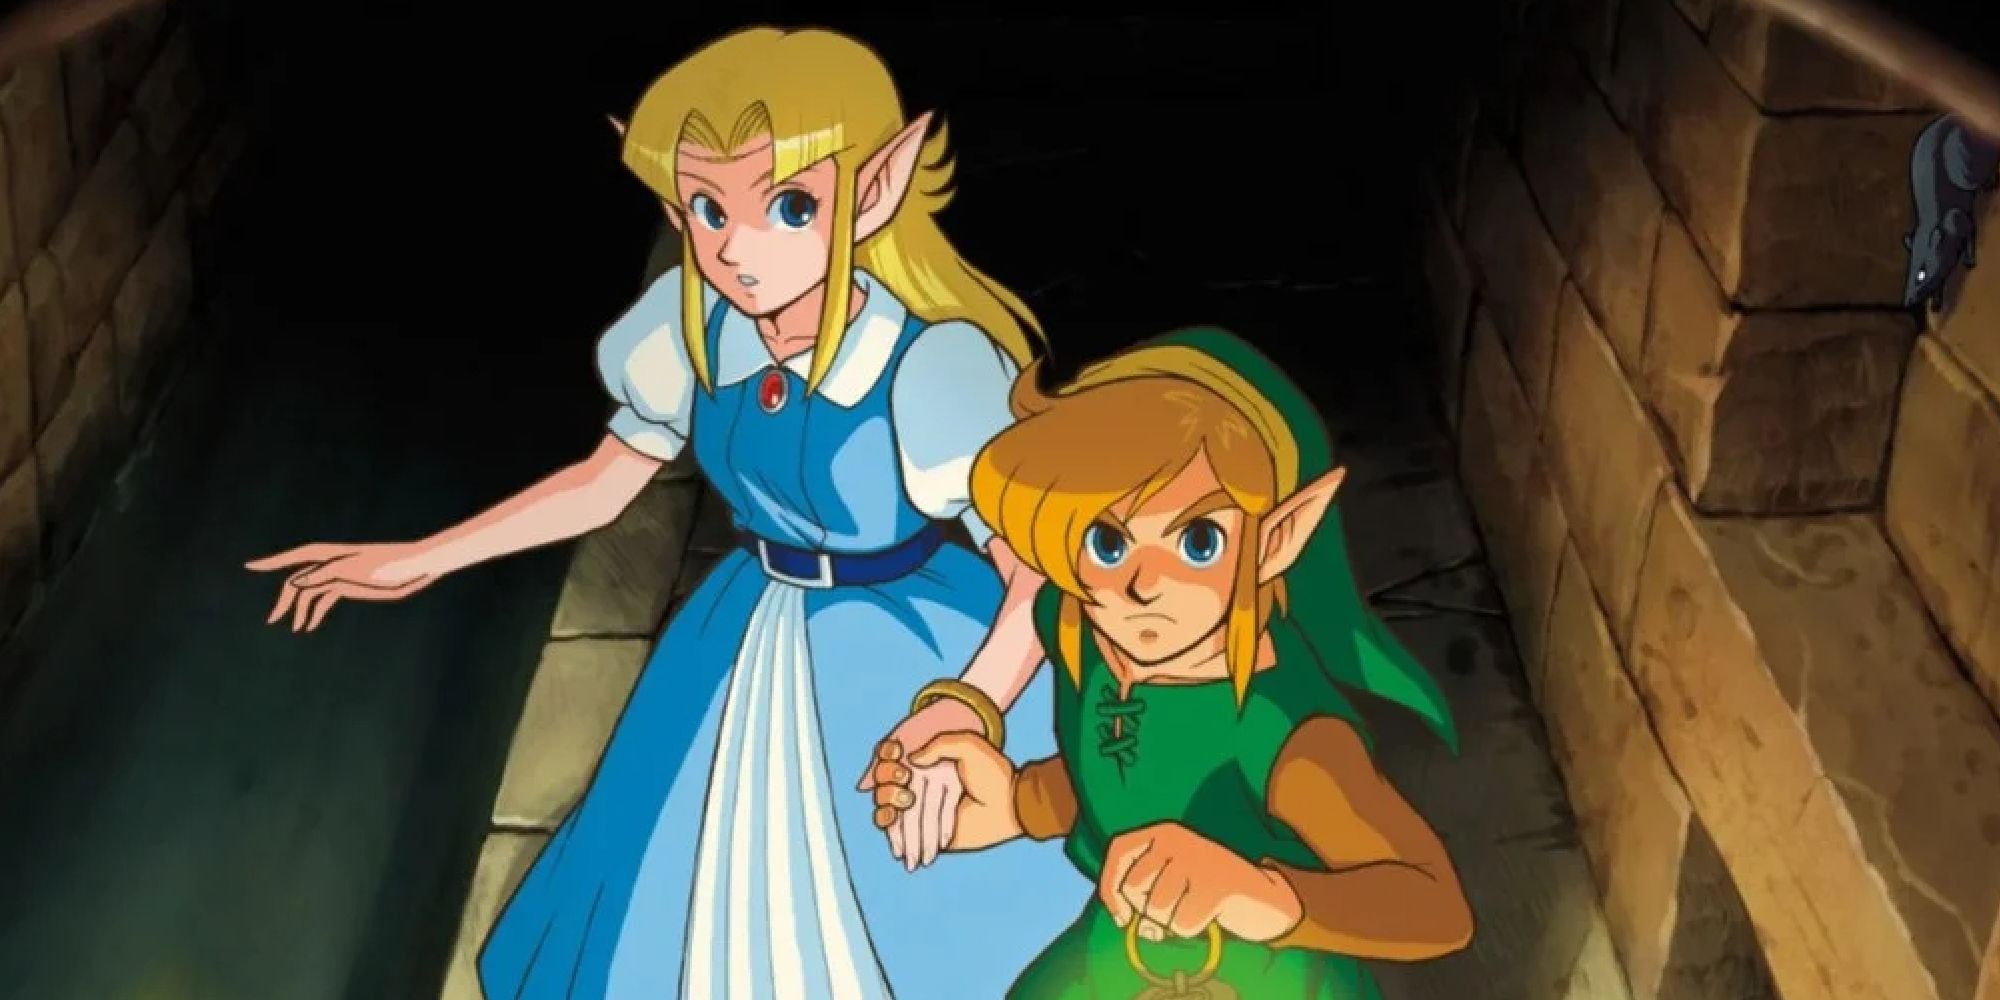 Link leading Zelda through the underground in promo art for A Link to the Past